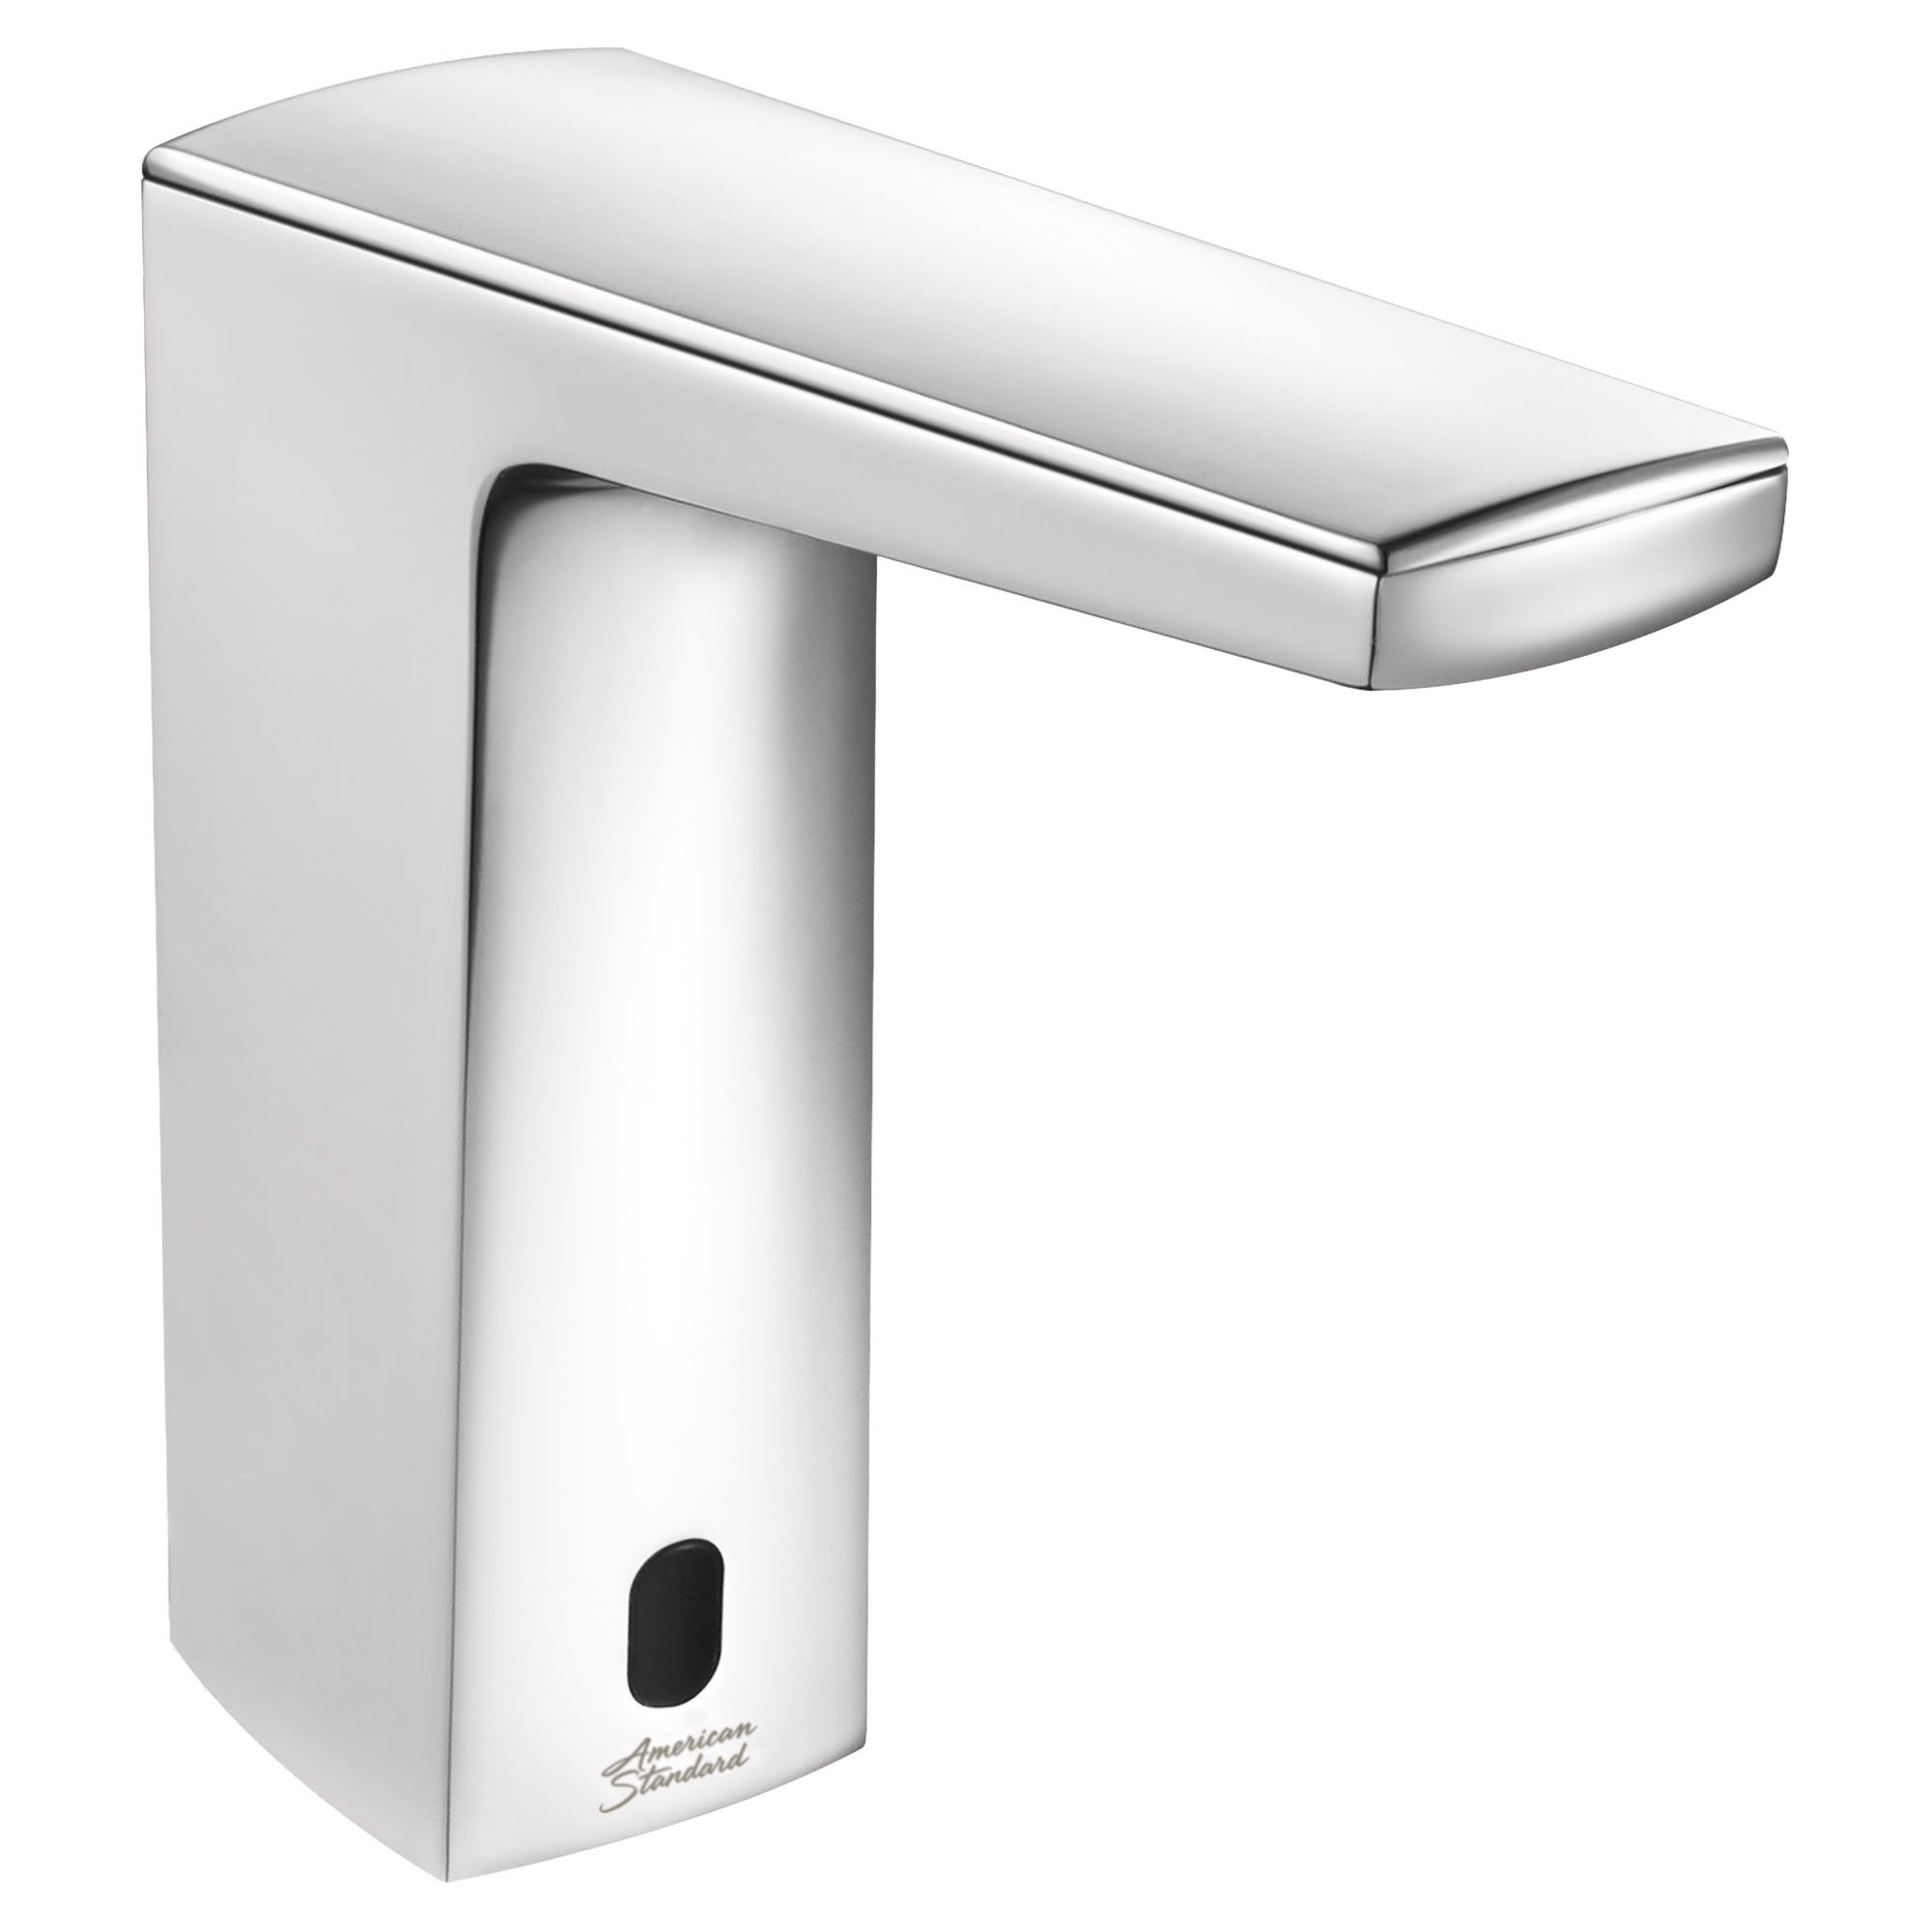 Paradigm™ Selectronic™ Touchless Faucet, Base Model With SmarTherm Safety Shut-Off + ADM, 0.35 gpm/1.3 Lpm